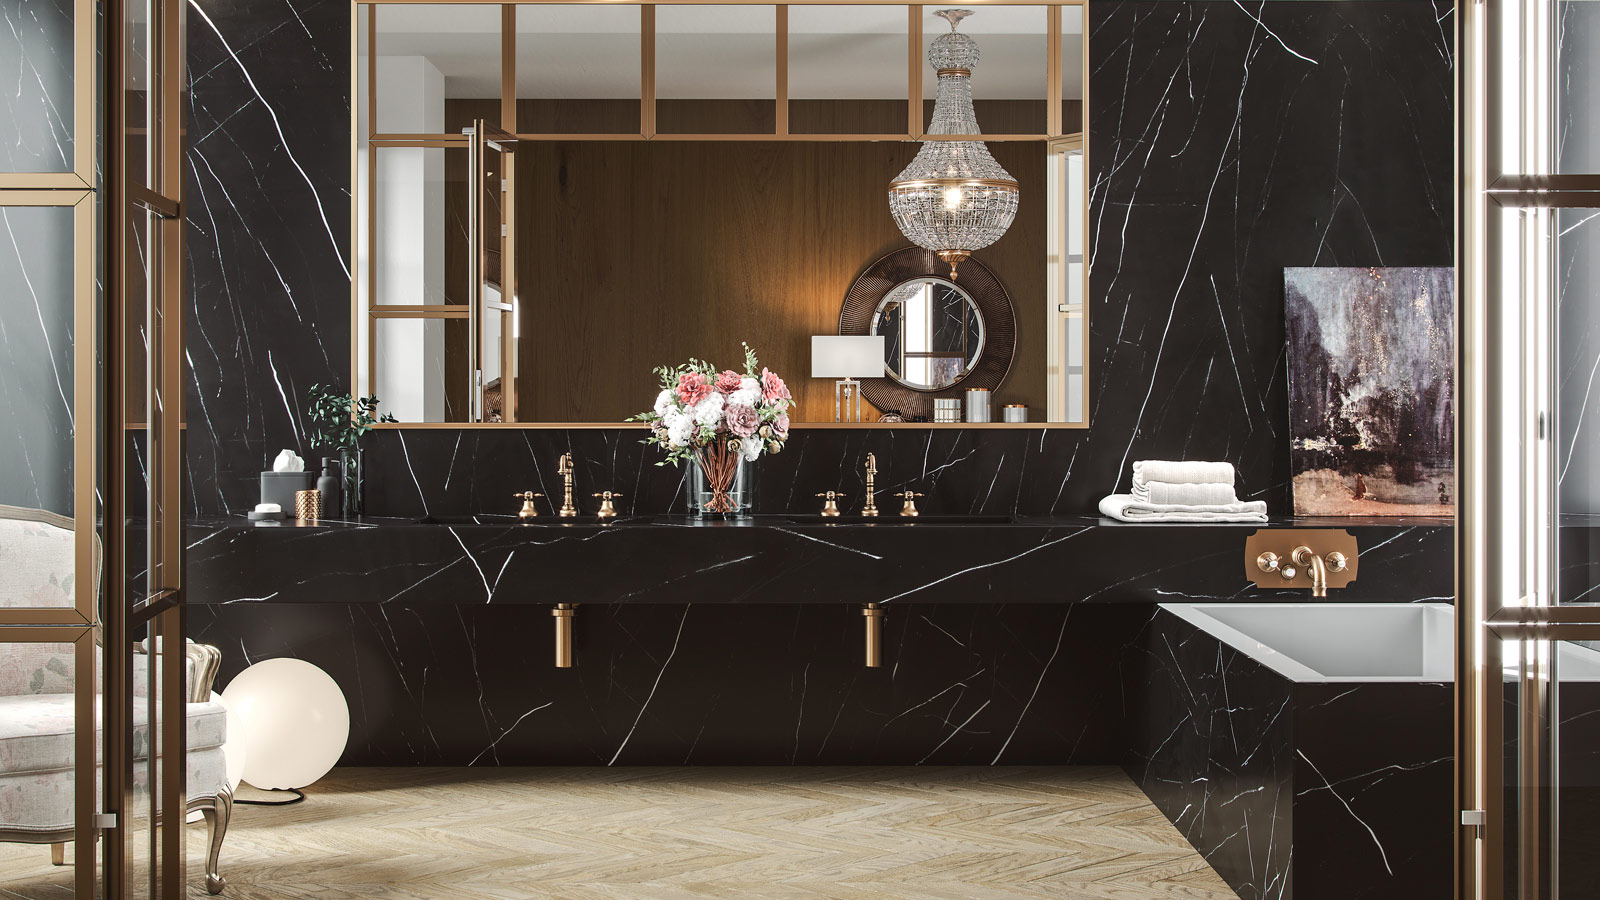 Coverlux™: the new material from Krion inspired by natural stone